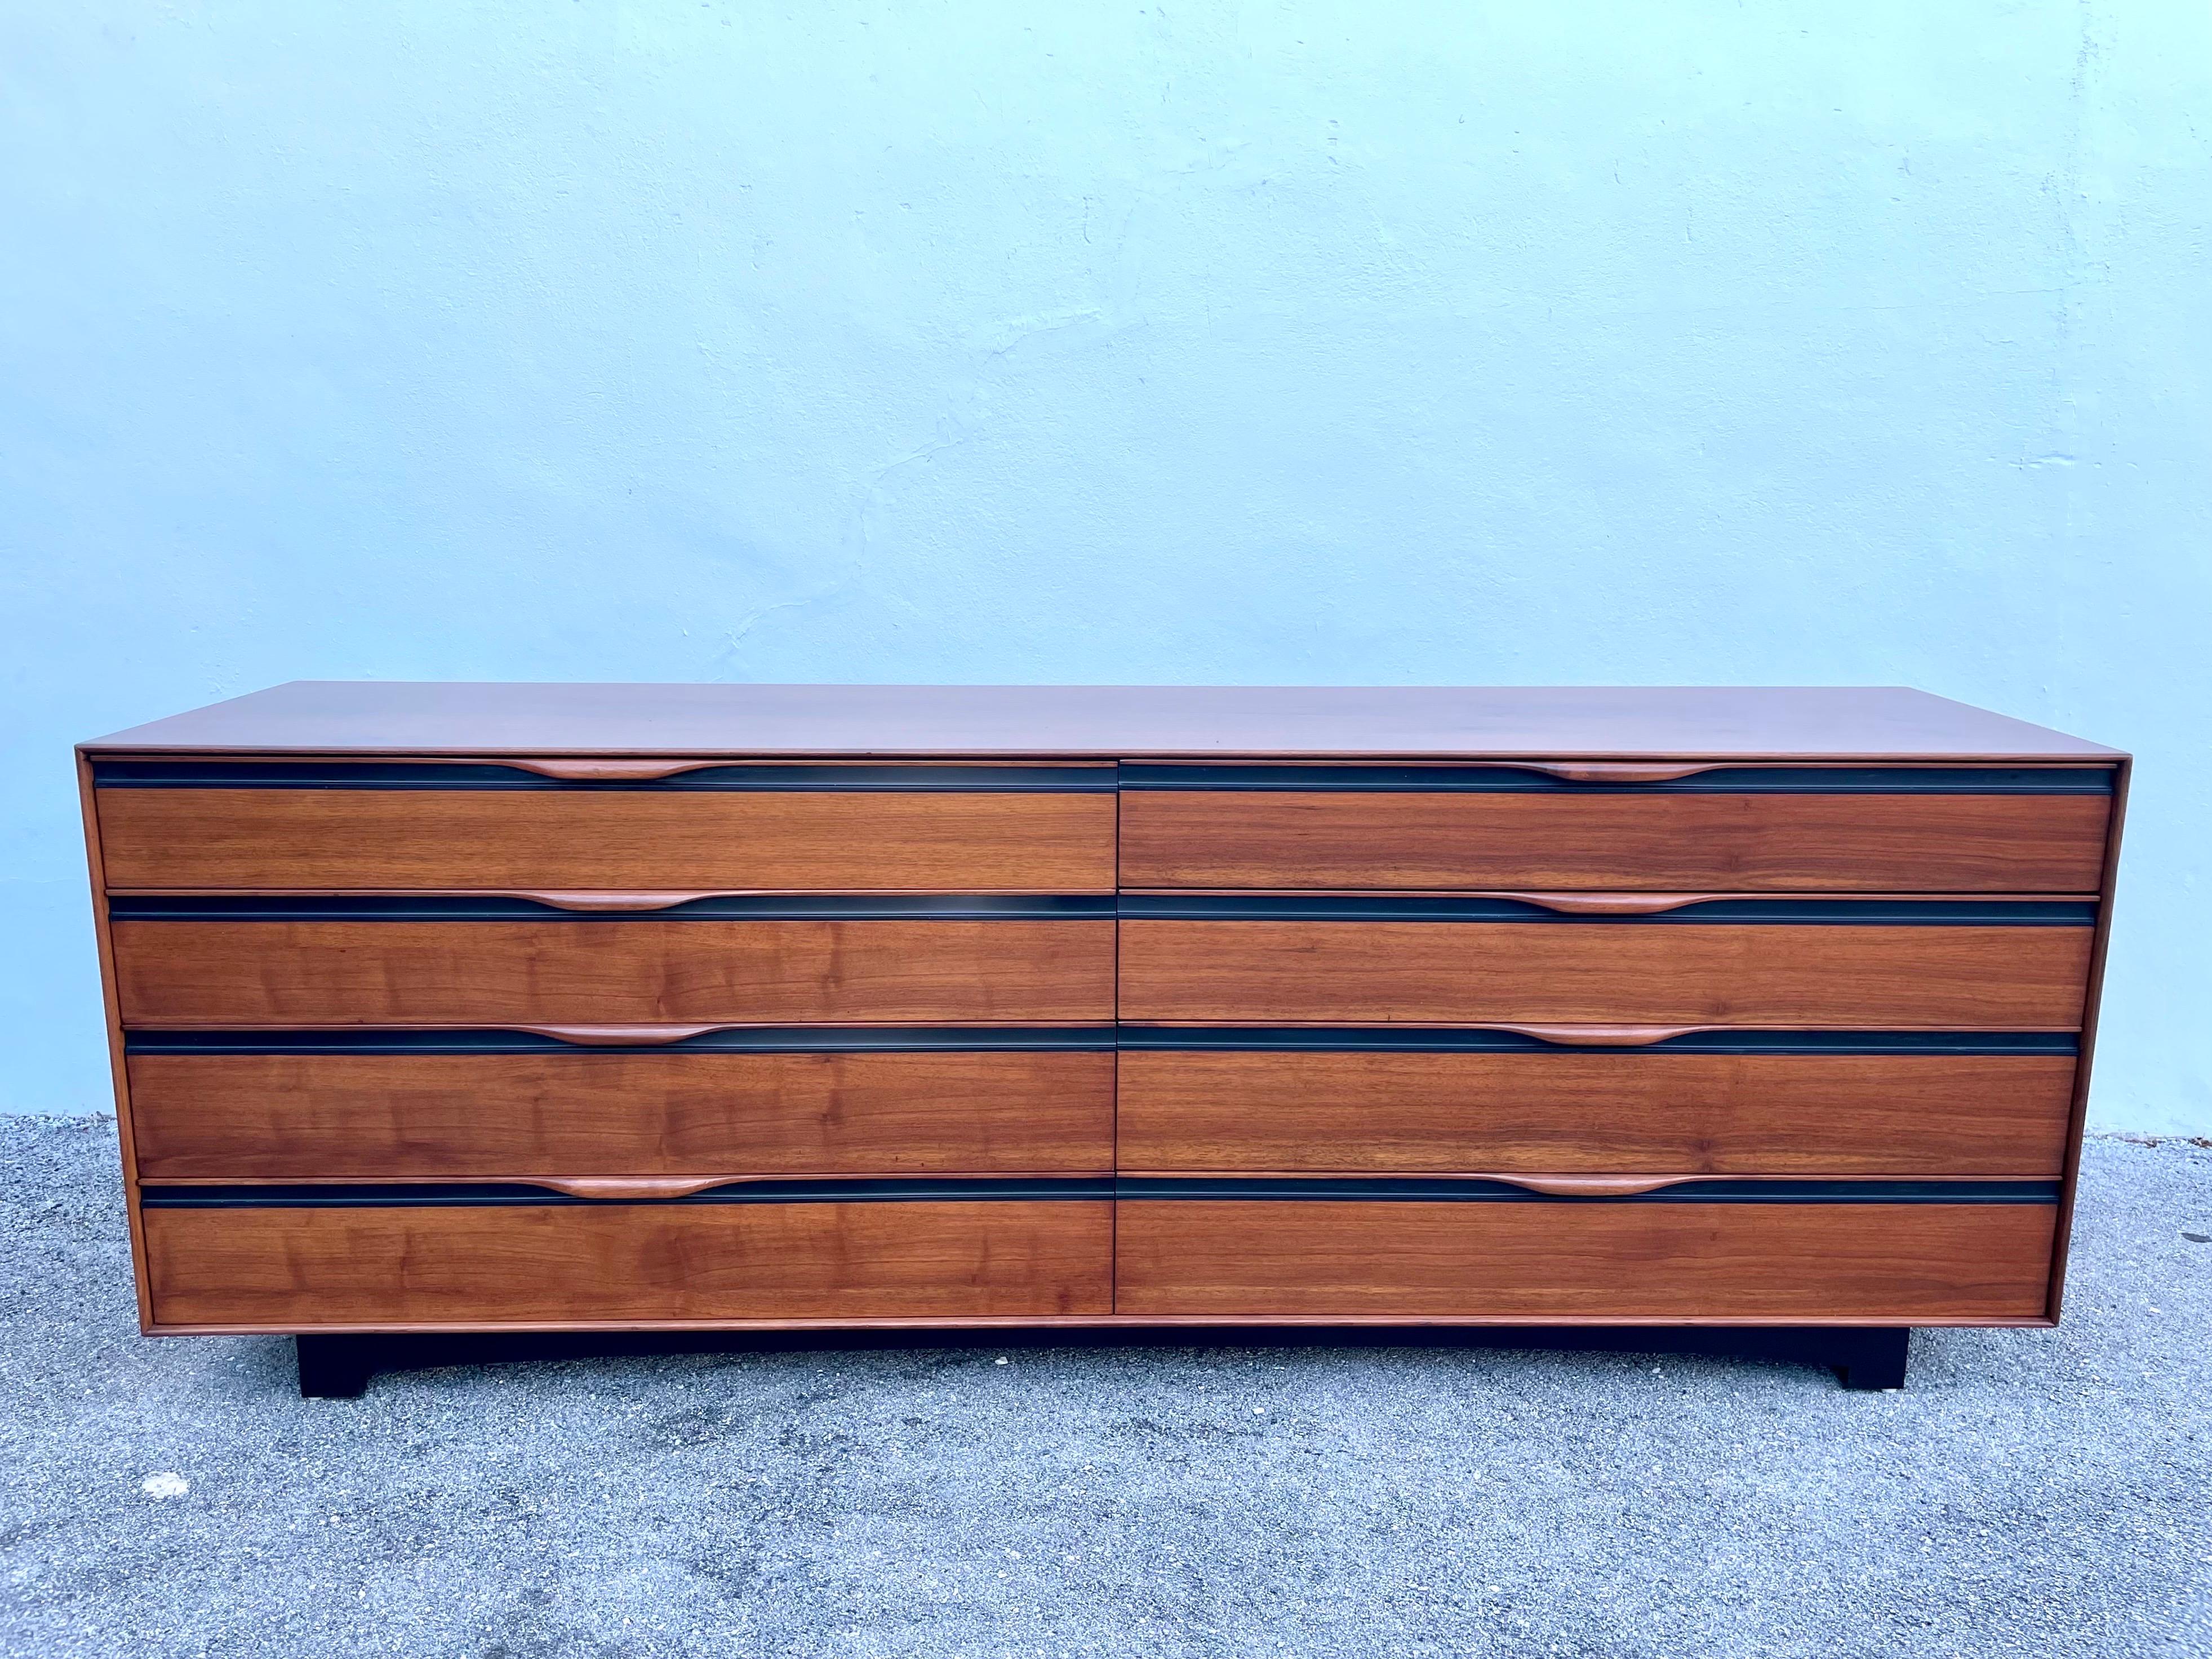 This is an excellent long version of John Kapel's iconic dresser by Glenn of California in walnut and black trim. Eight ample drawers and the drawers slide easily.